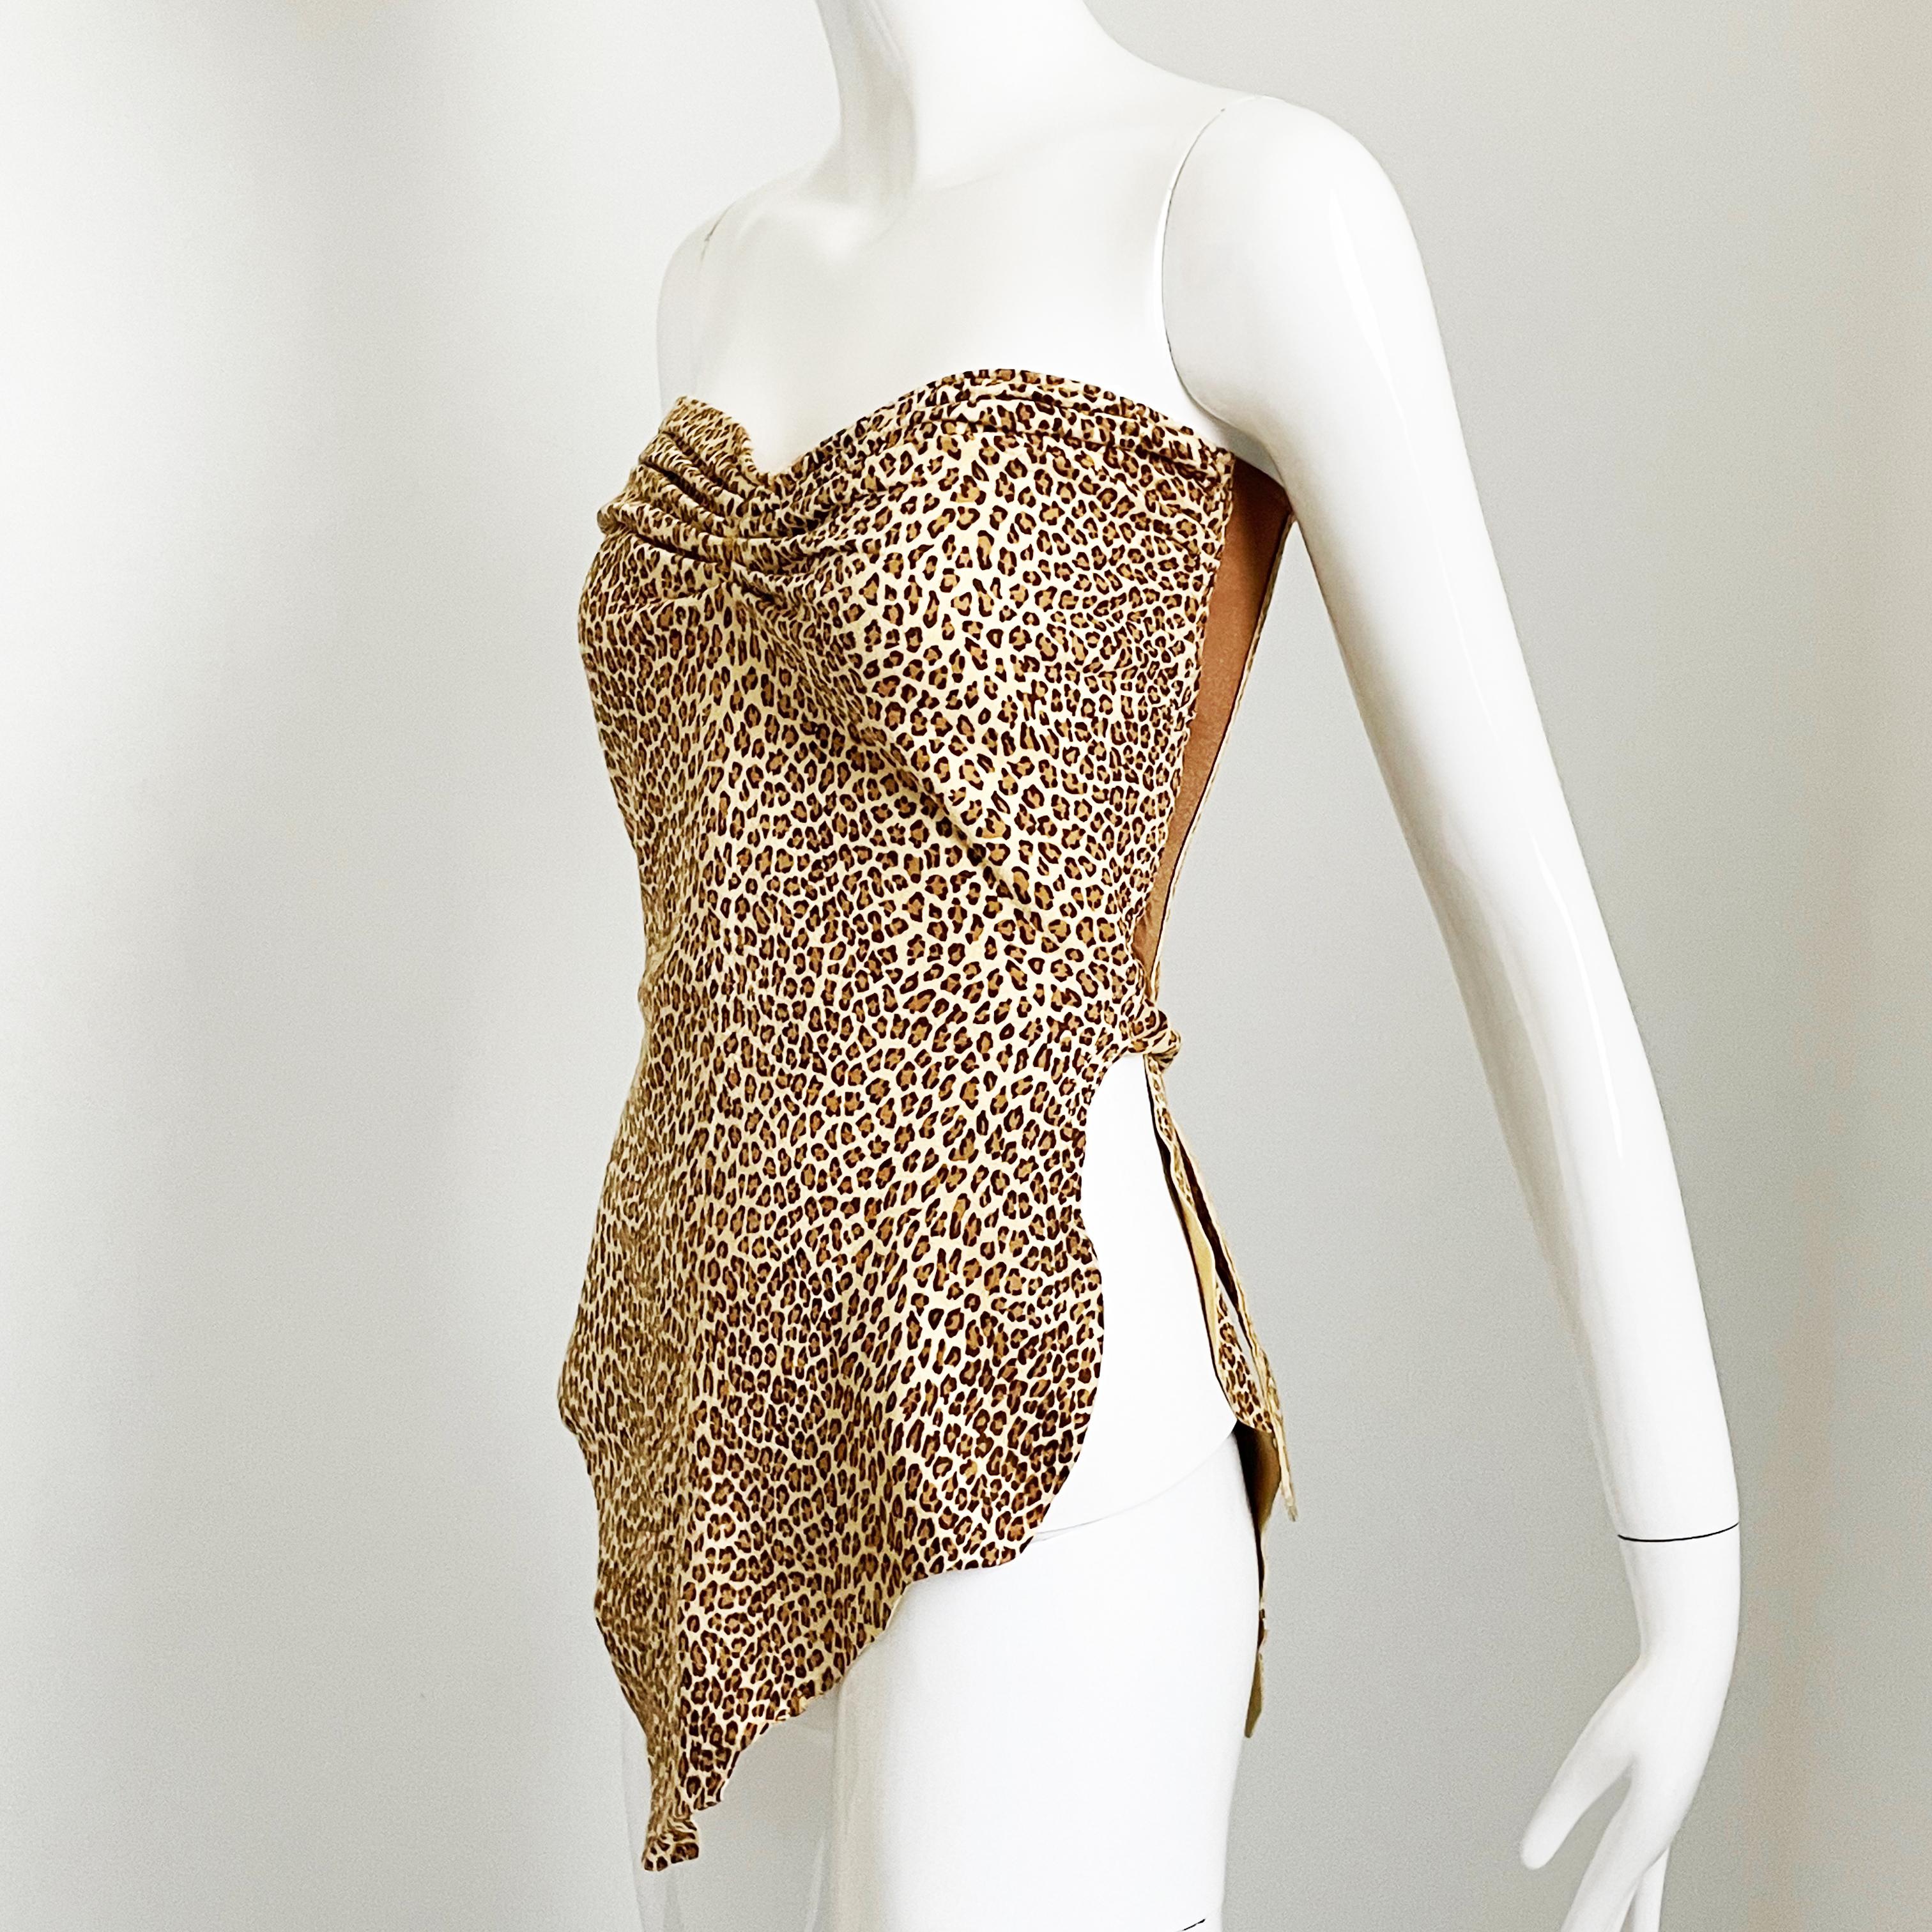 Norma Kamali OMO Leather Corset Top with Wrap Ties Leopard Print Vintage HTF For Sale 2